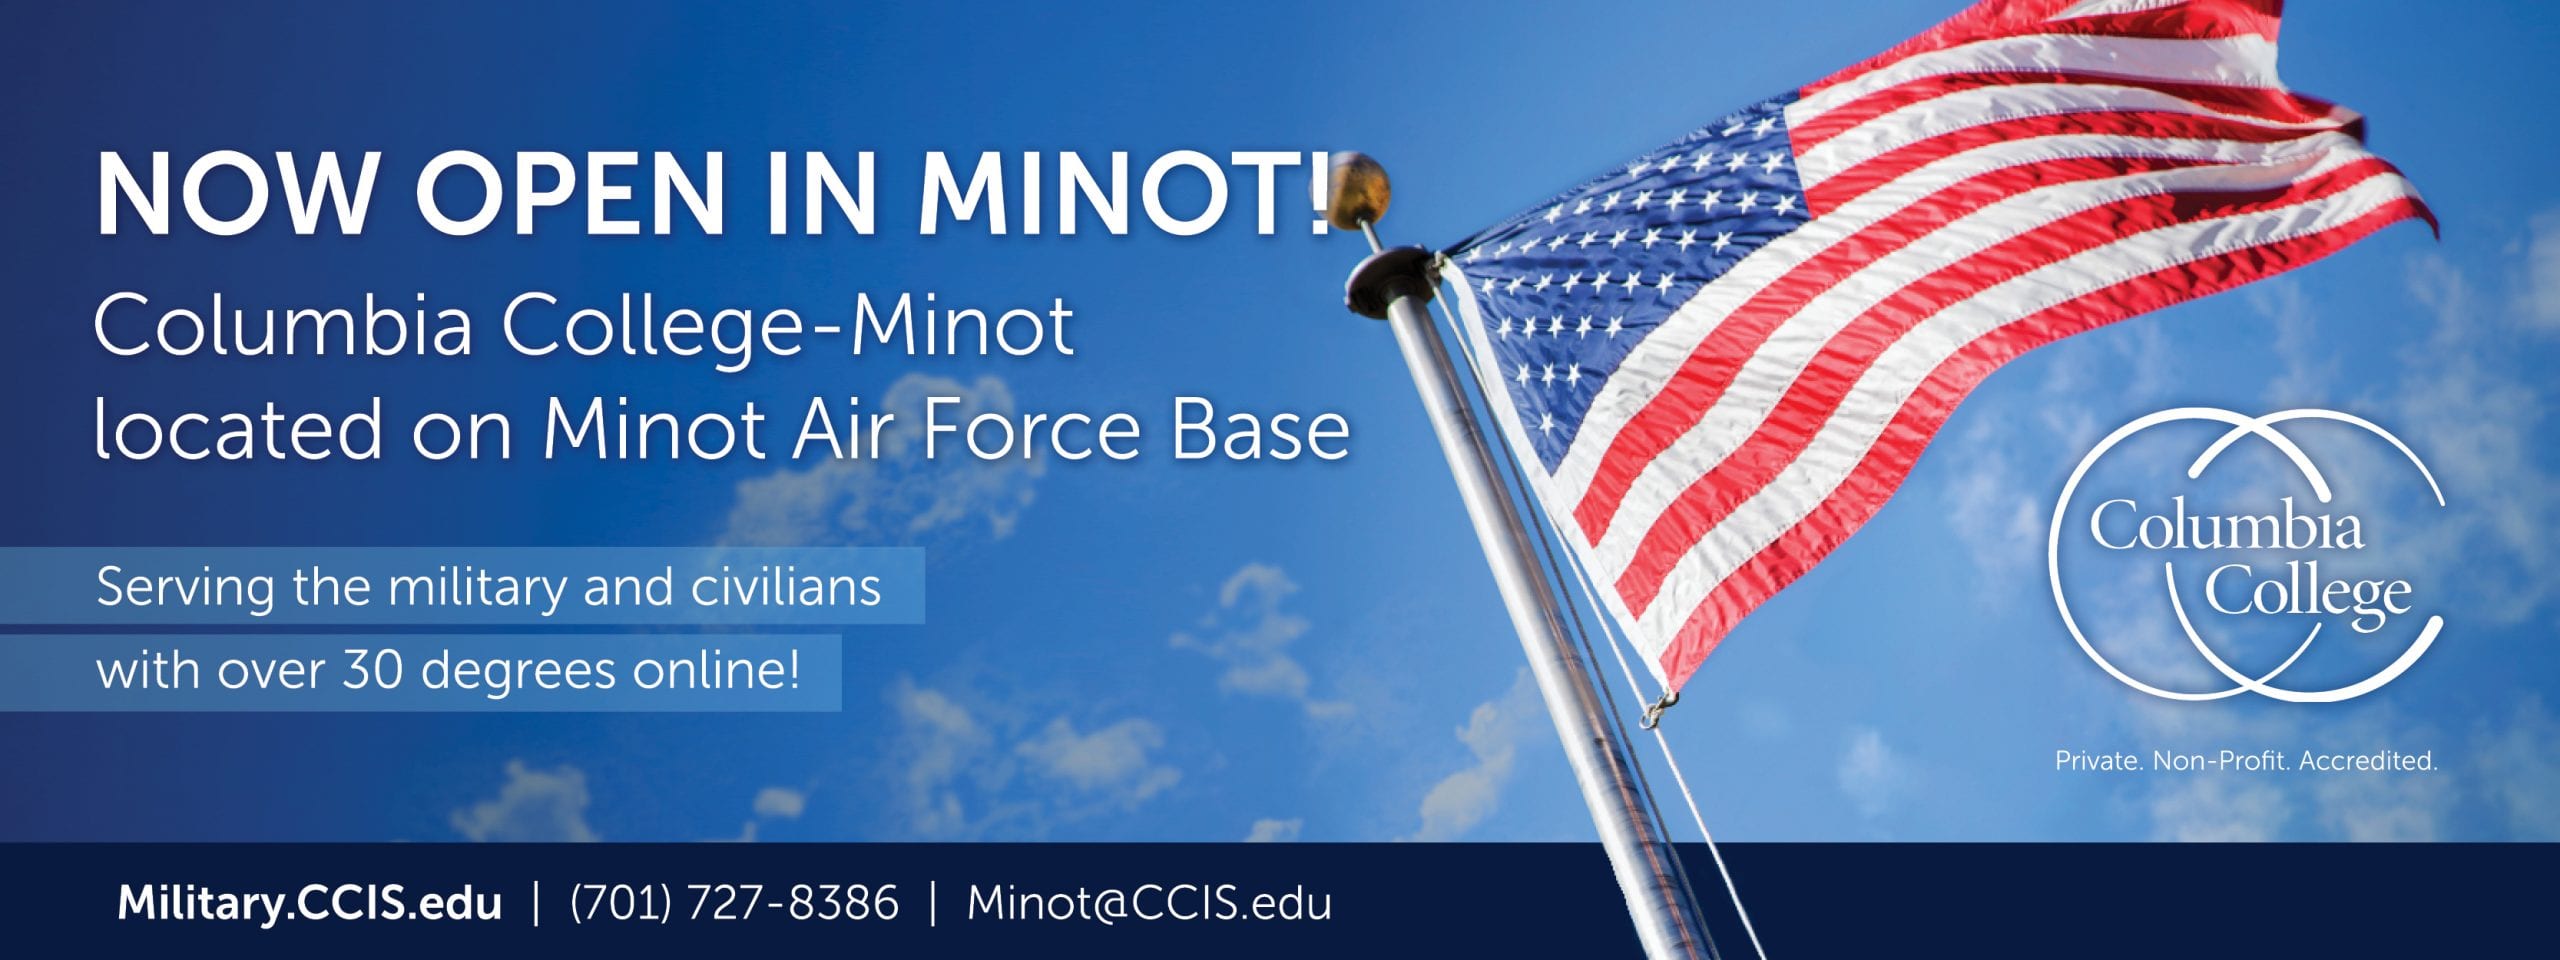 Northern Sentry Bringing News To Minot And The Minot Air Force Base